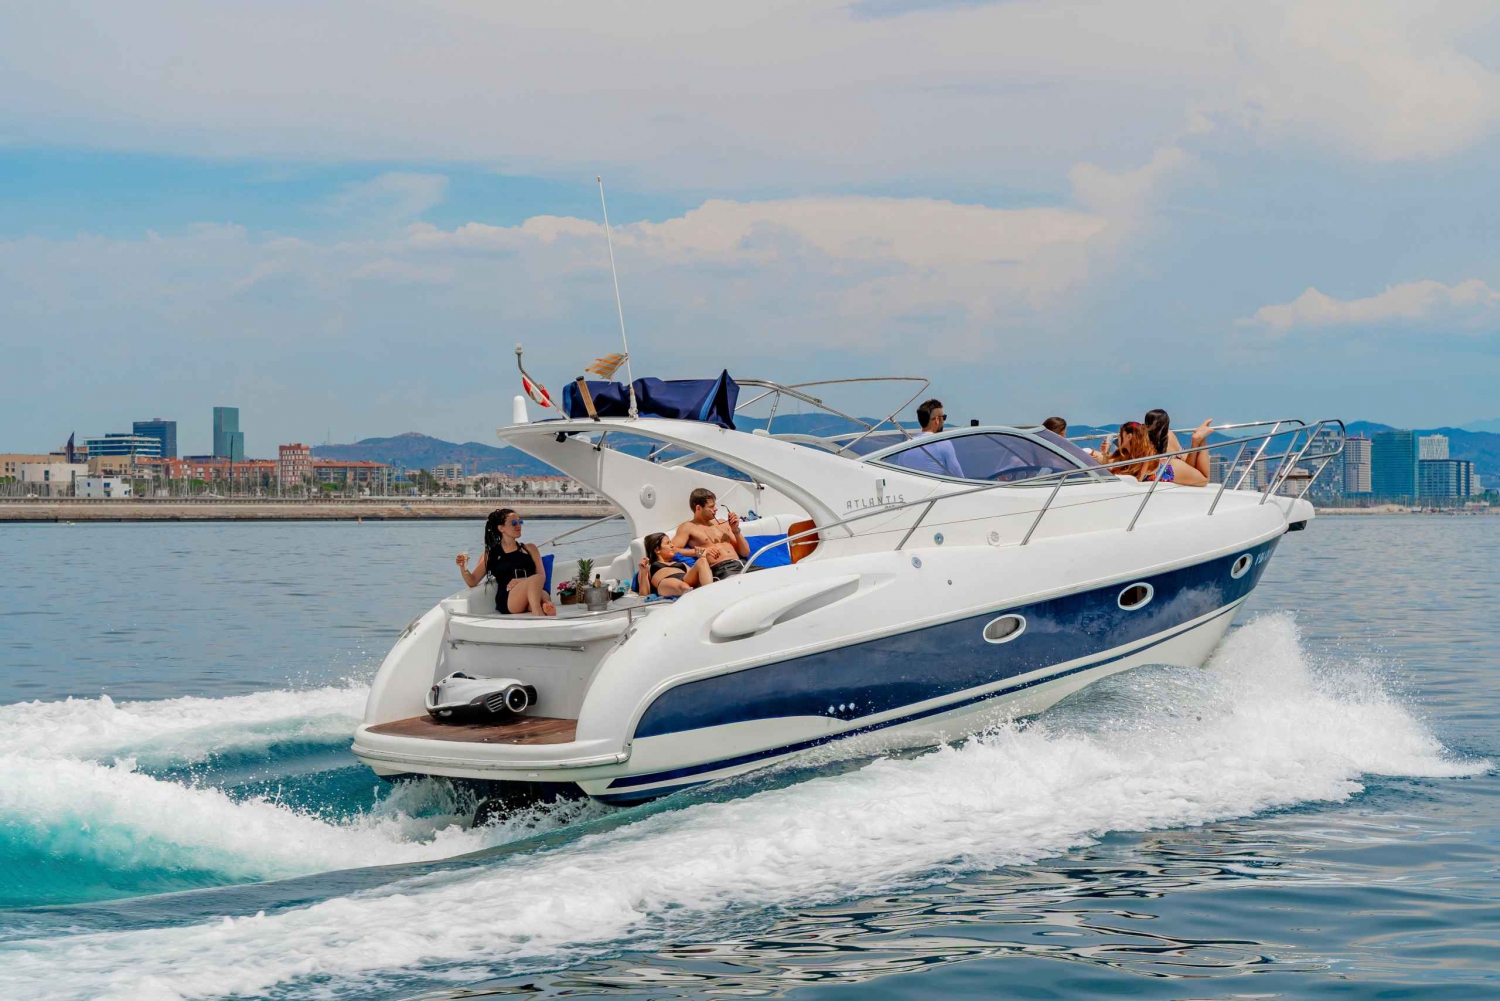 Barcelona: Exclusive Yatch tour with Drinks and Snacks